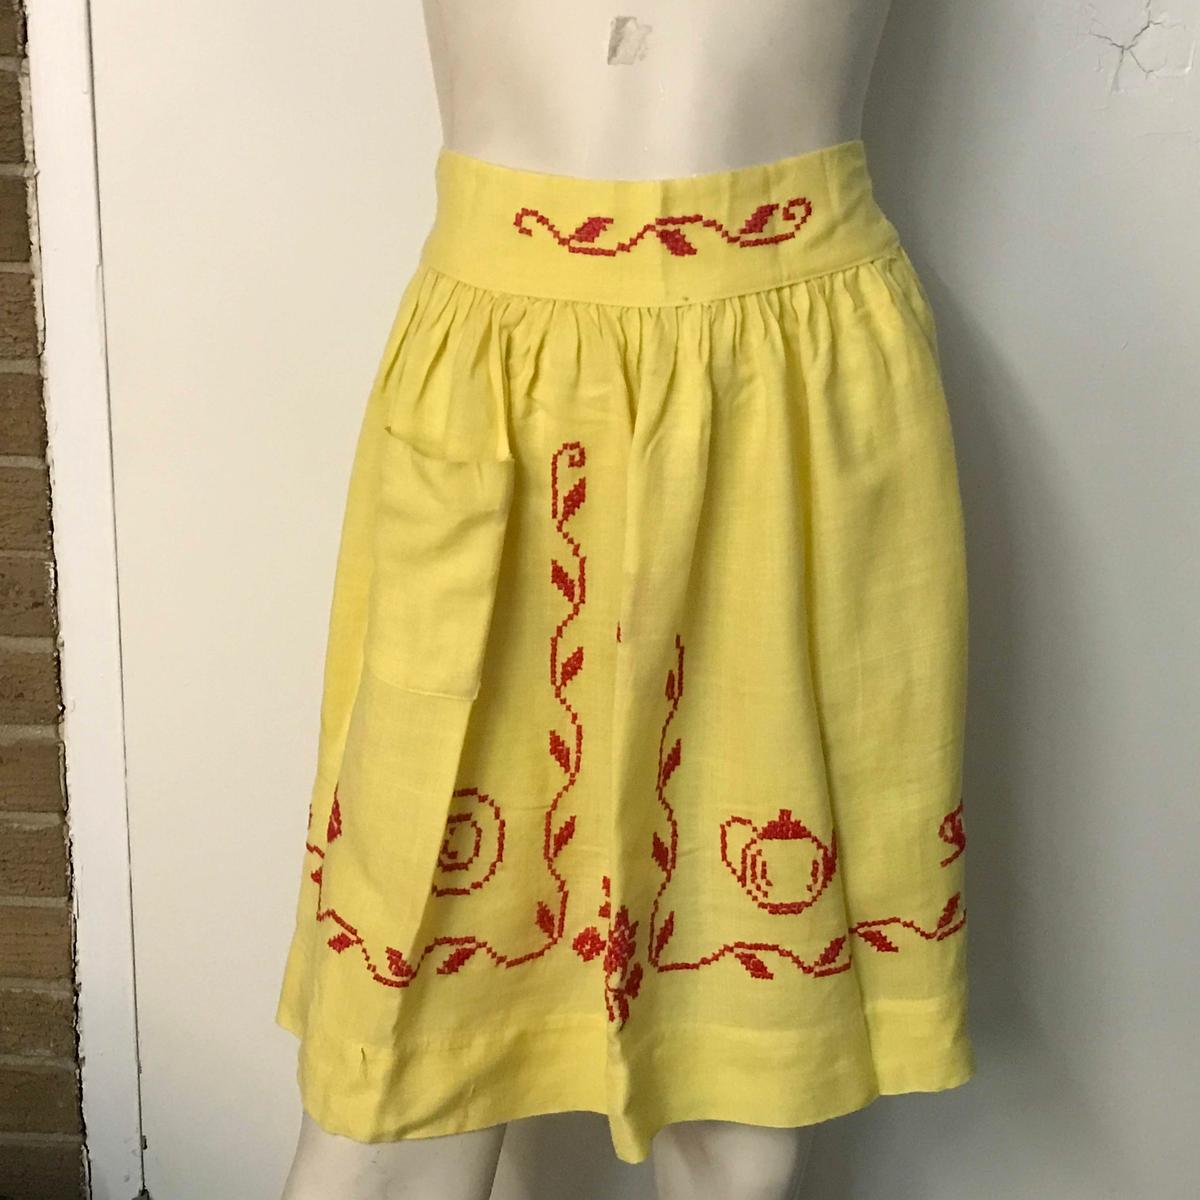 Vintage Yellow Apron with Red Embroidery & One Pocket